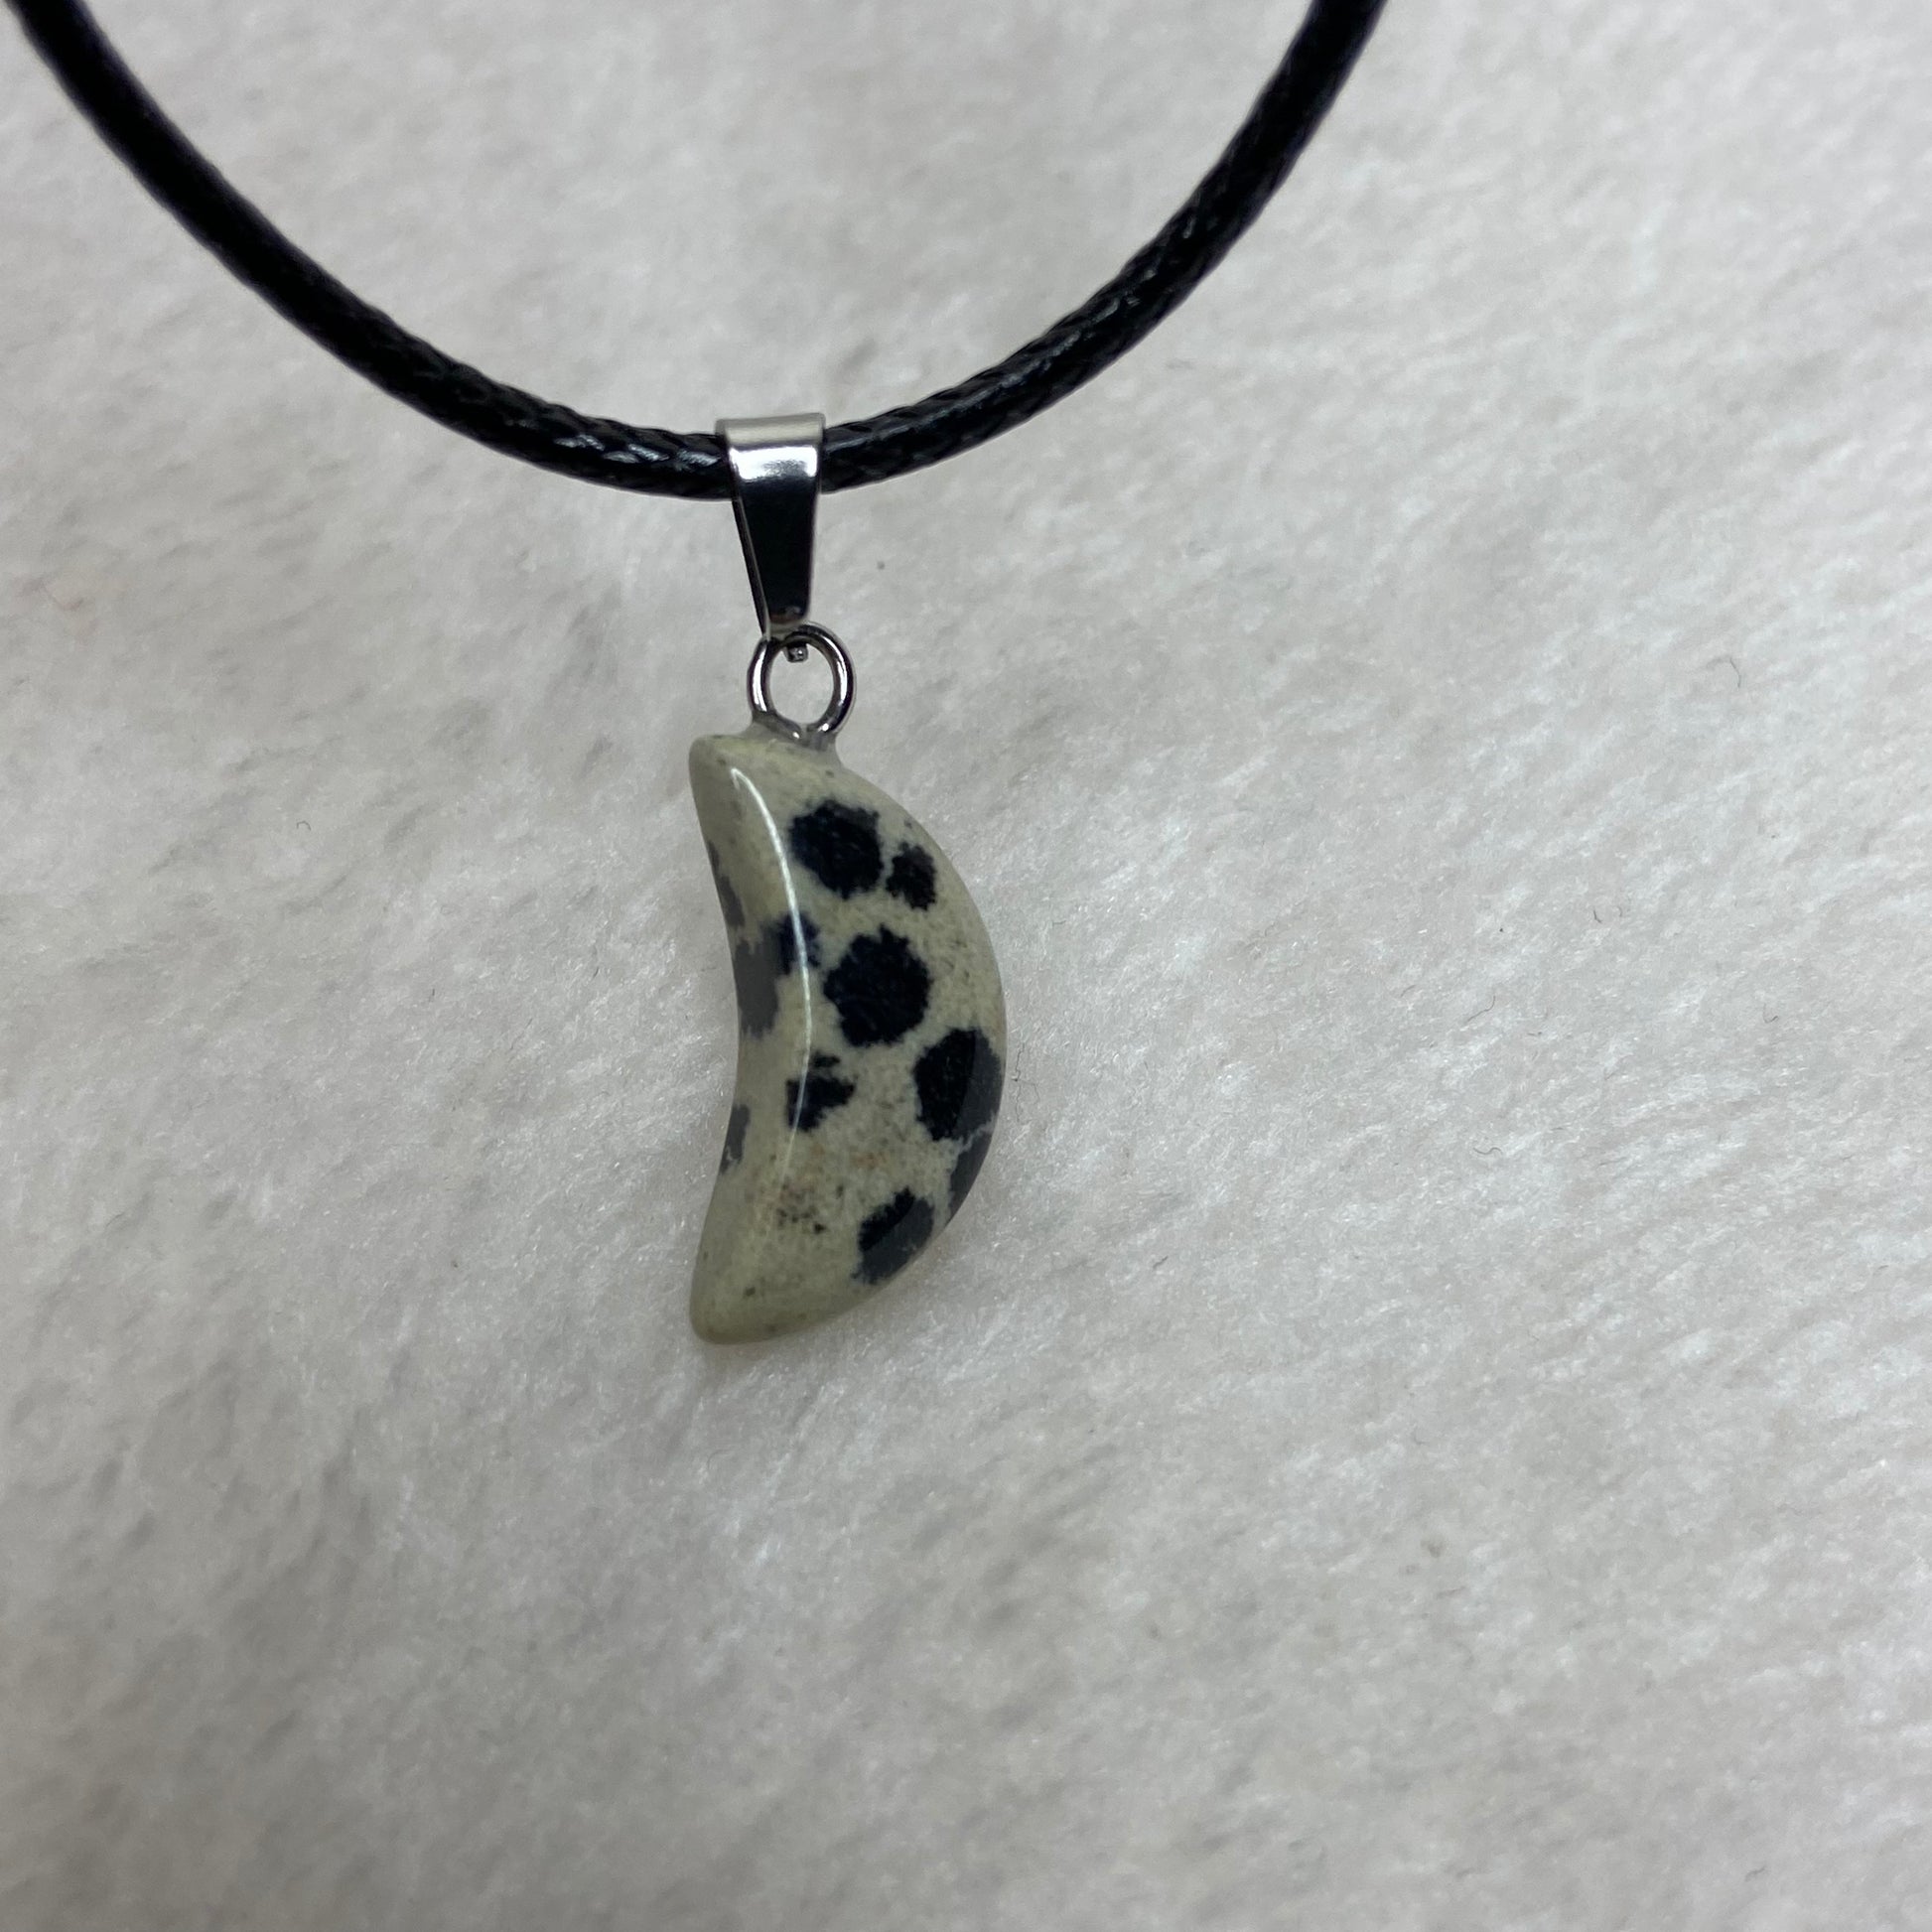 Dalmation crystal pendant necklace.